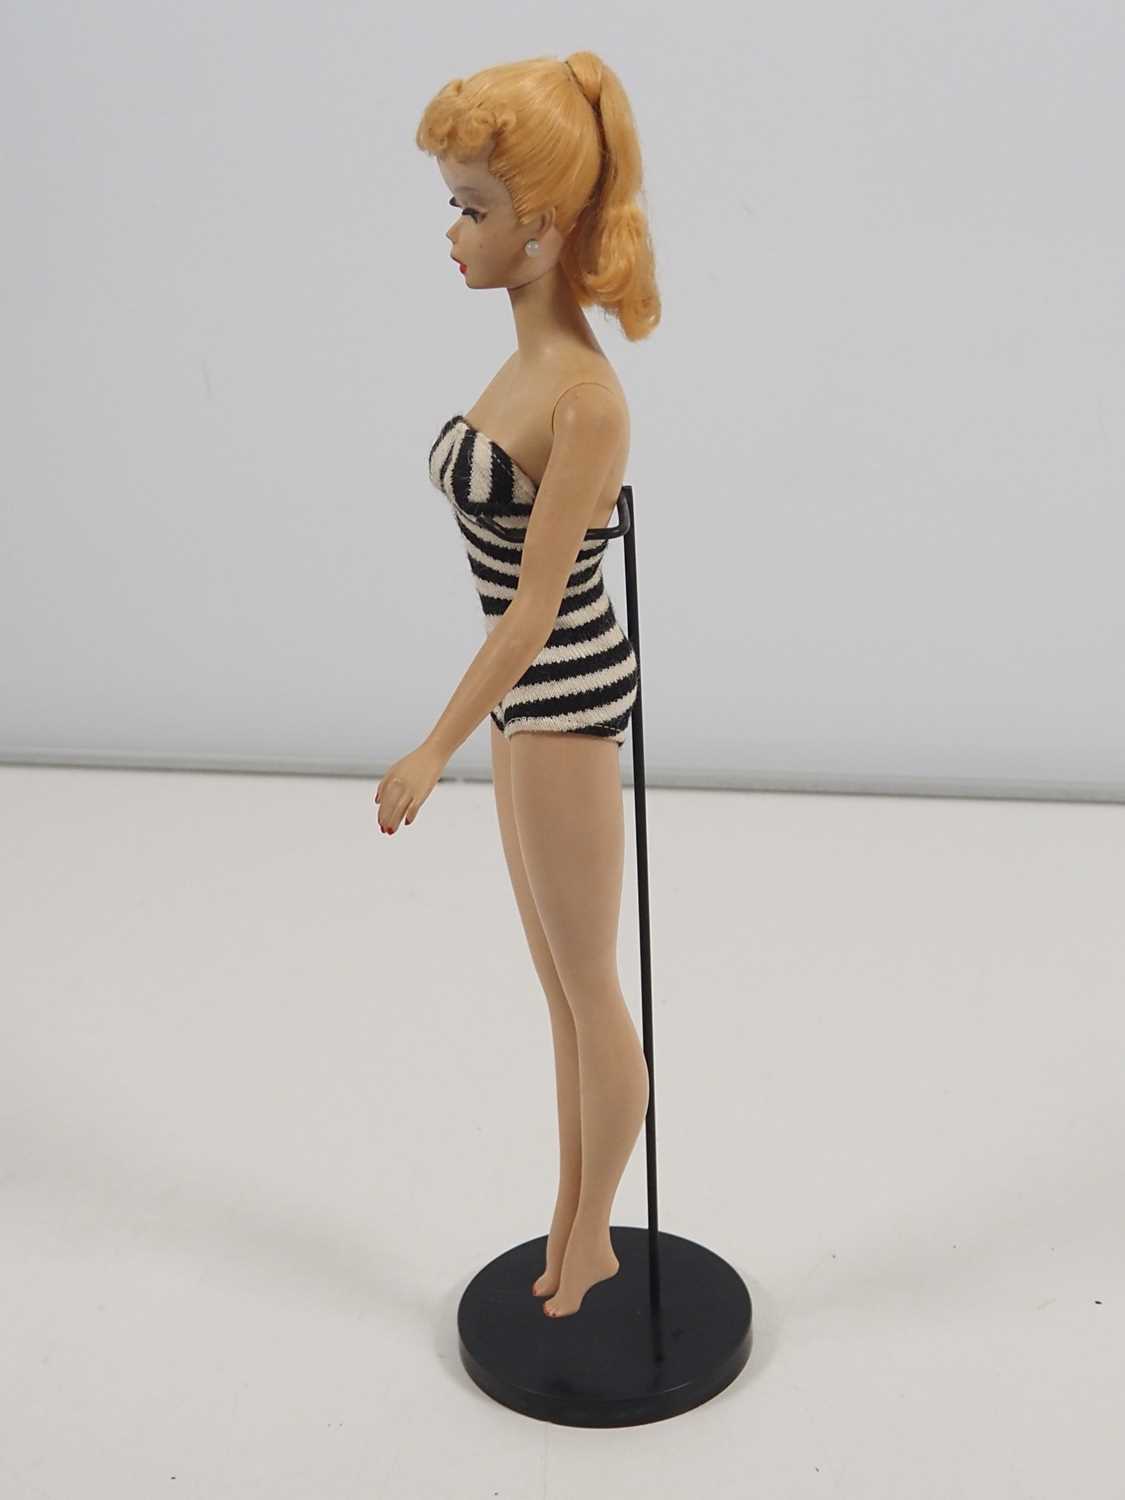 An original vintage MATTEL BARBIE doll, circa 1959/60, complete with swimsuit, mule shoes, - Image 4 of 9